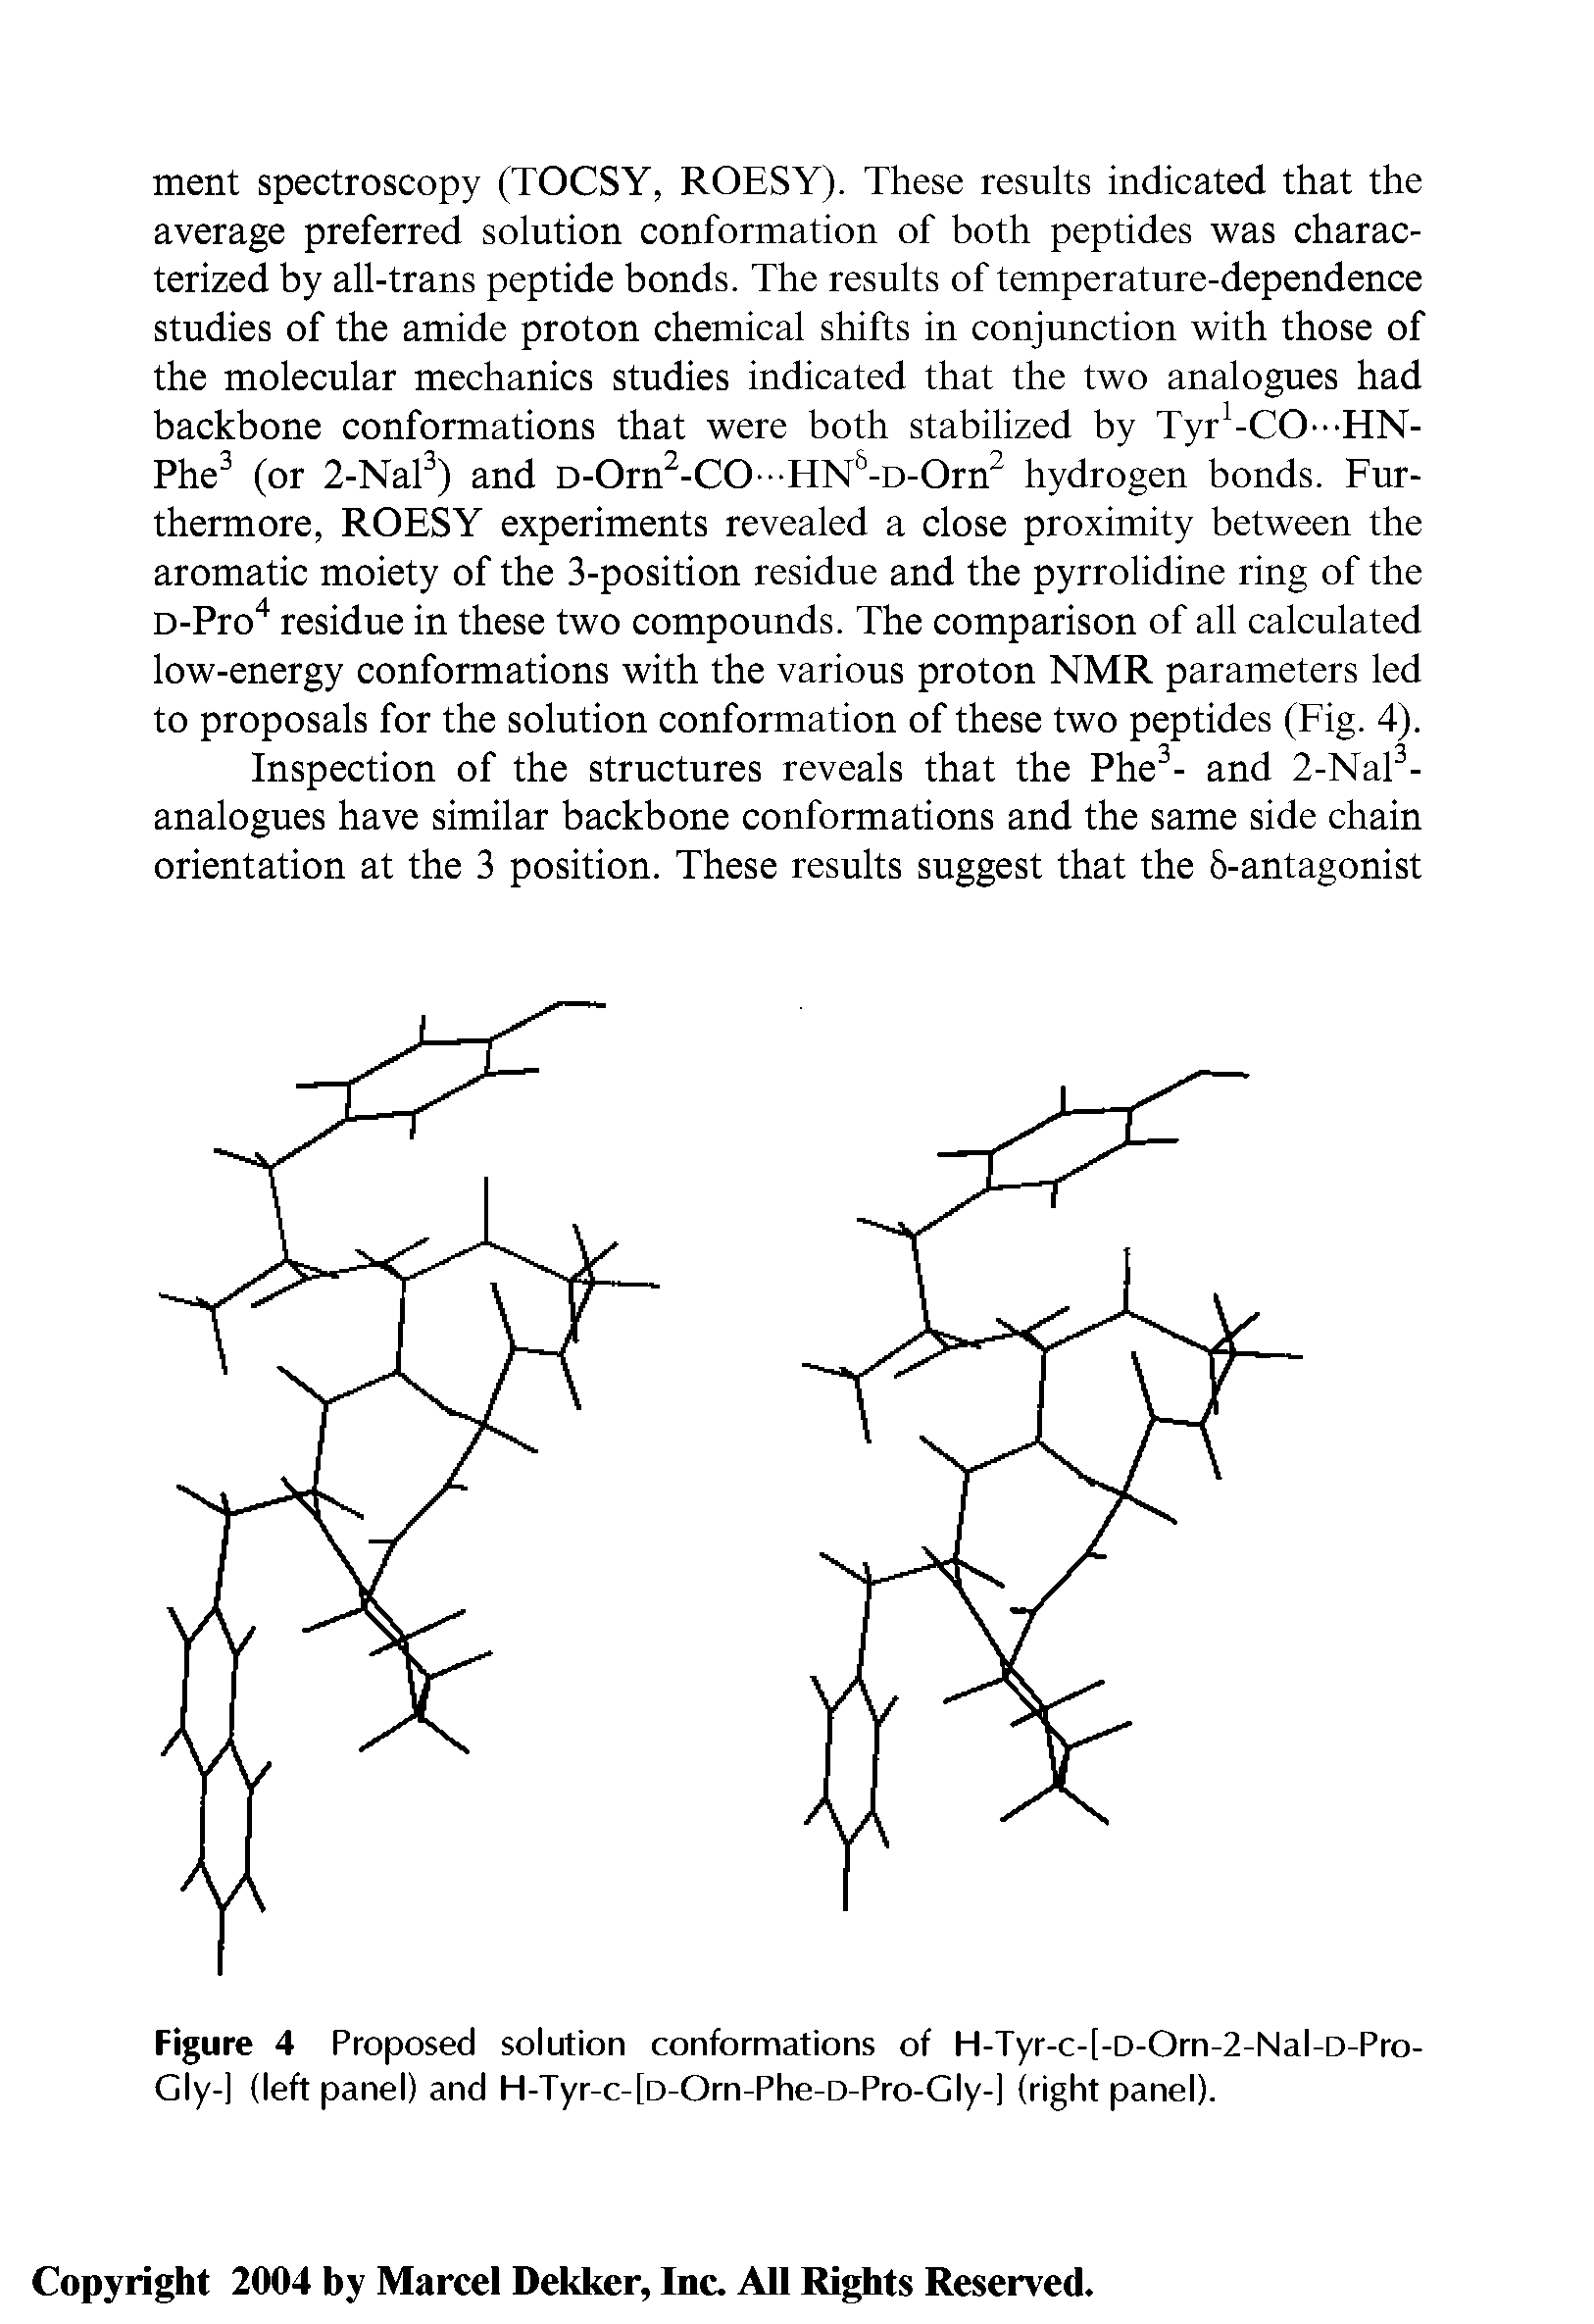 Figure 4 Proposed solution conformations of H-Tyr-c-[-D-Orn-2-Nal-D-Pro-Gly-] (left panel) and H-Tyr-c-[D-Orn-Phe-D-Pro-Gly-] (right panel).